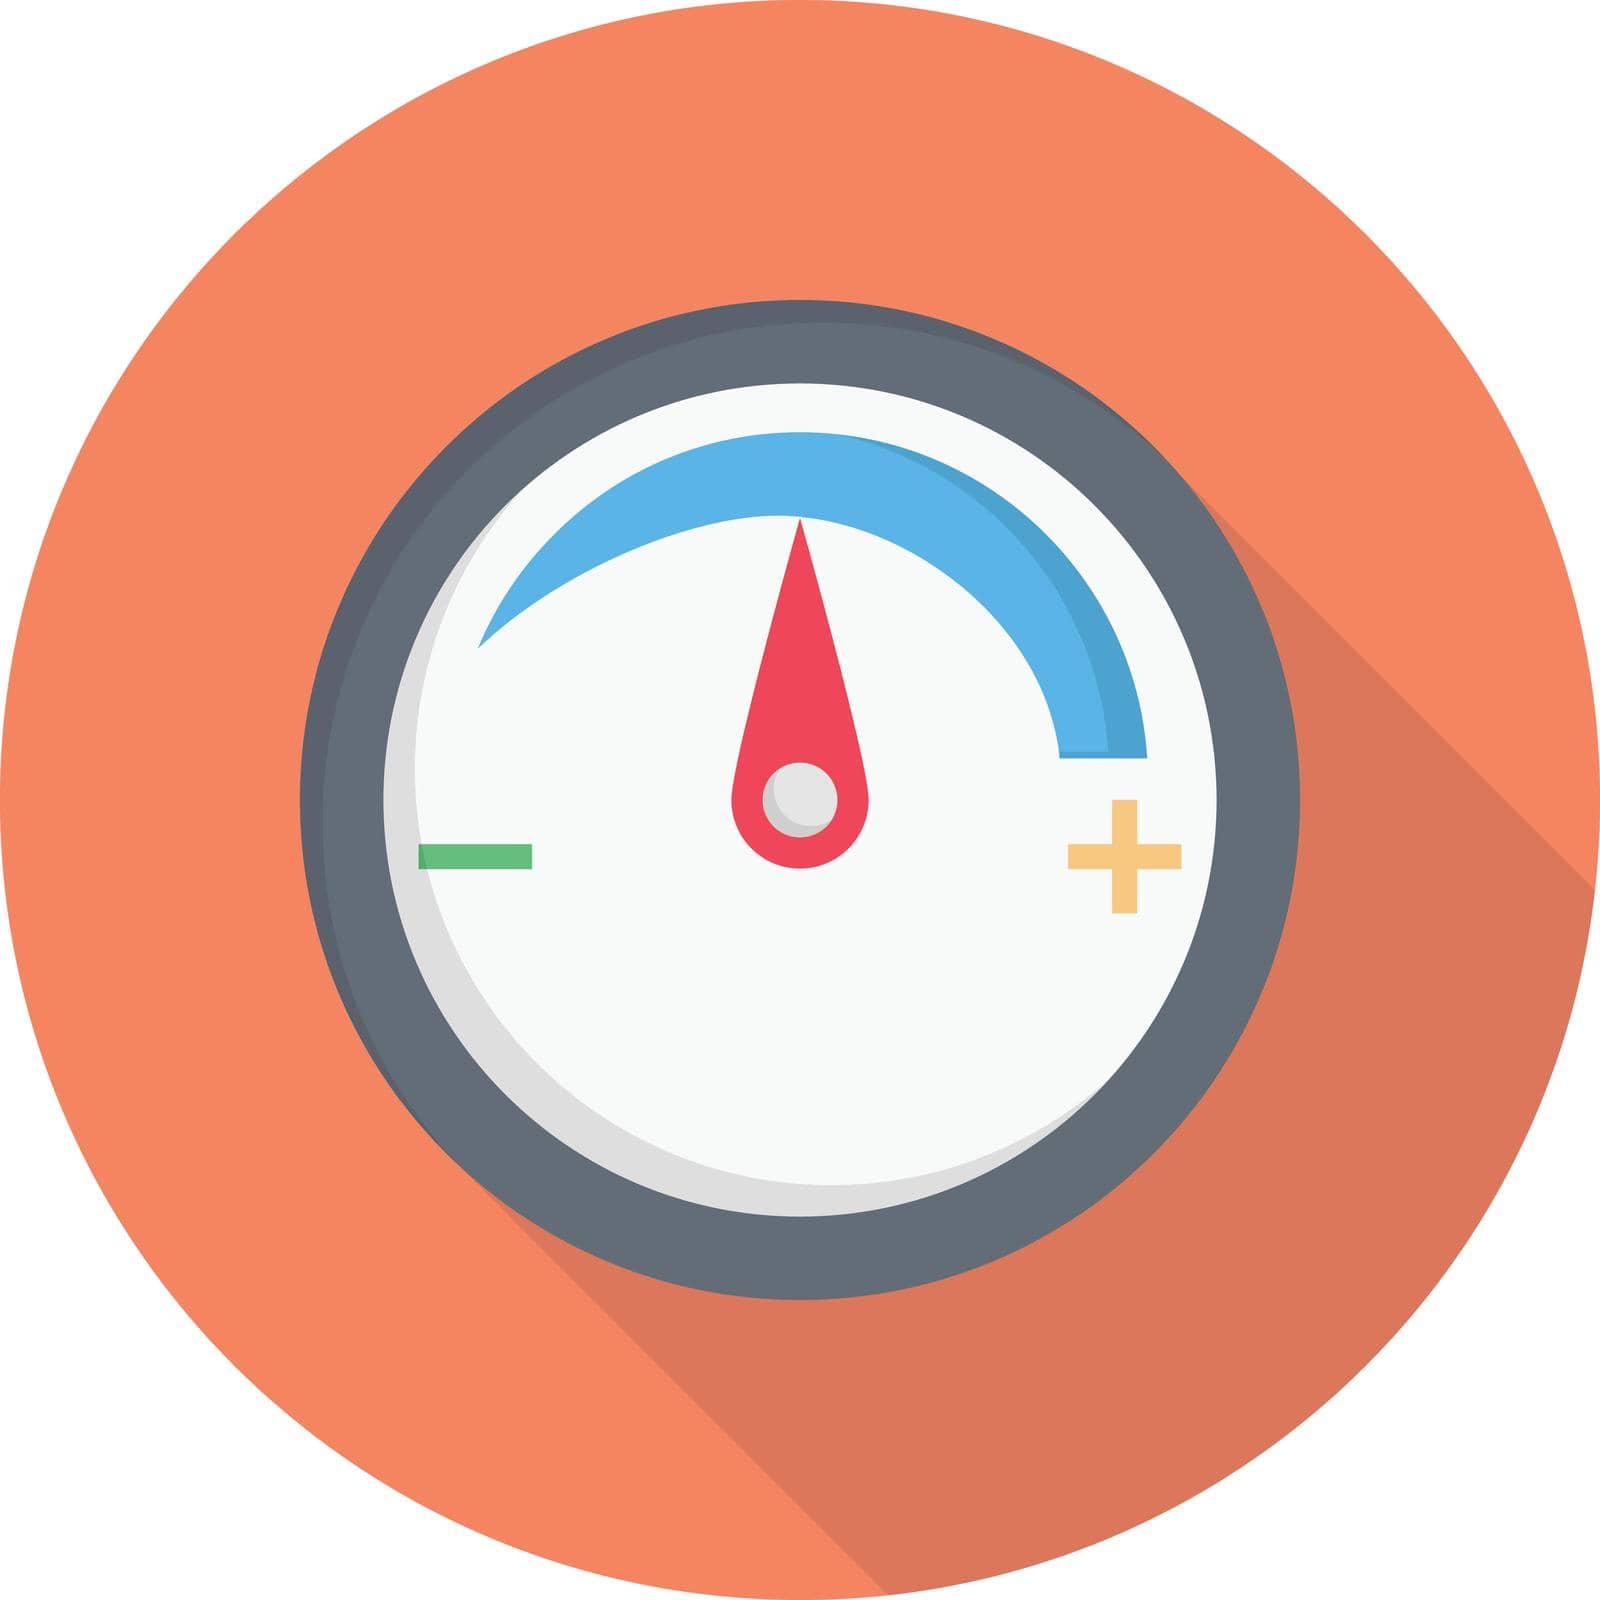 meter vector flat colour icon